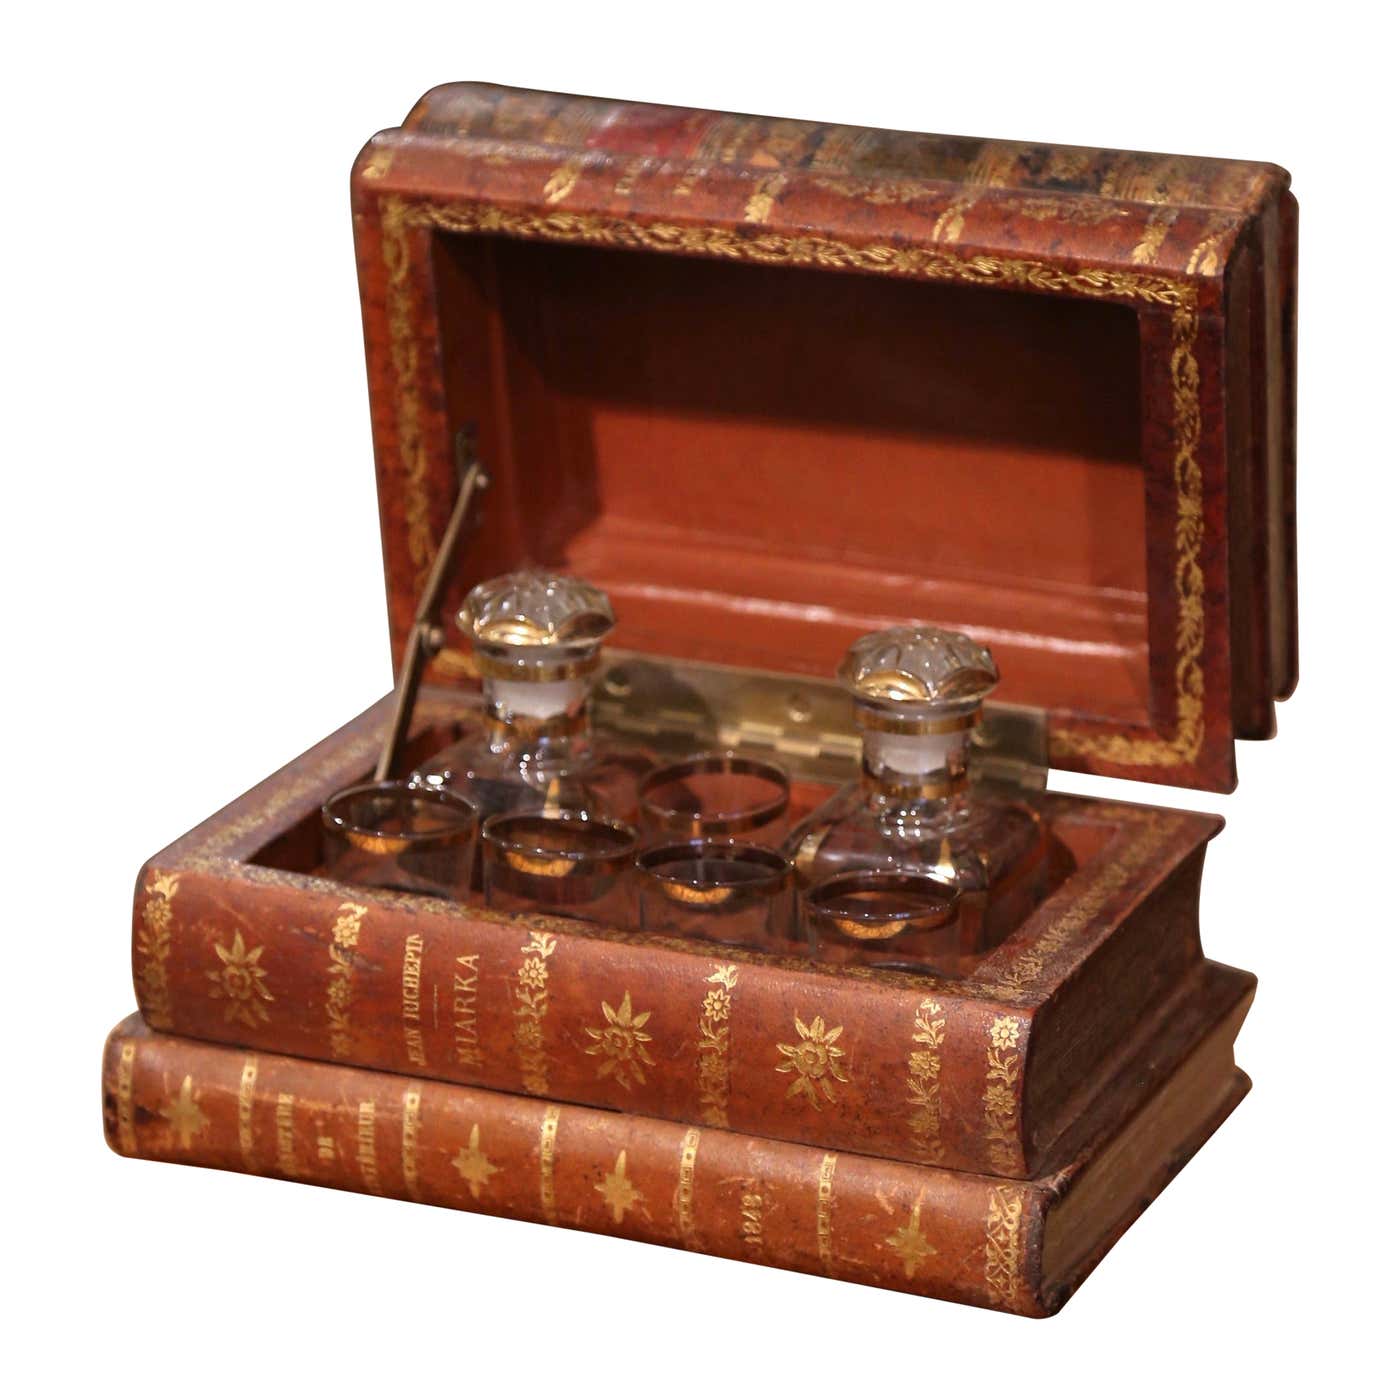 Early 20th Century French Leather Book Liquor Box with Shot